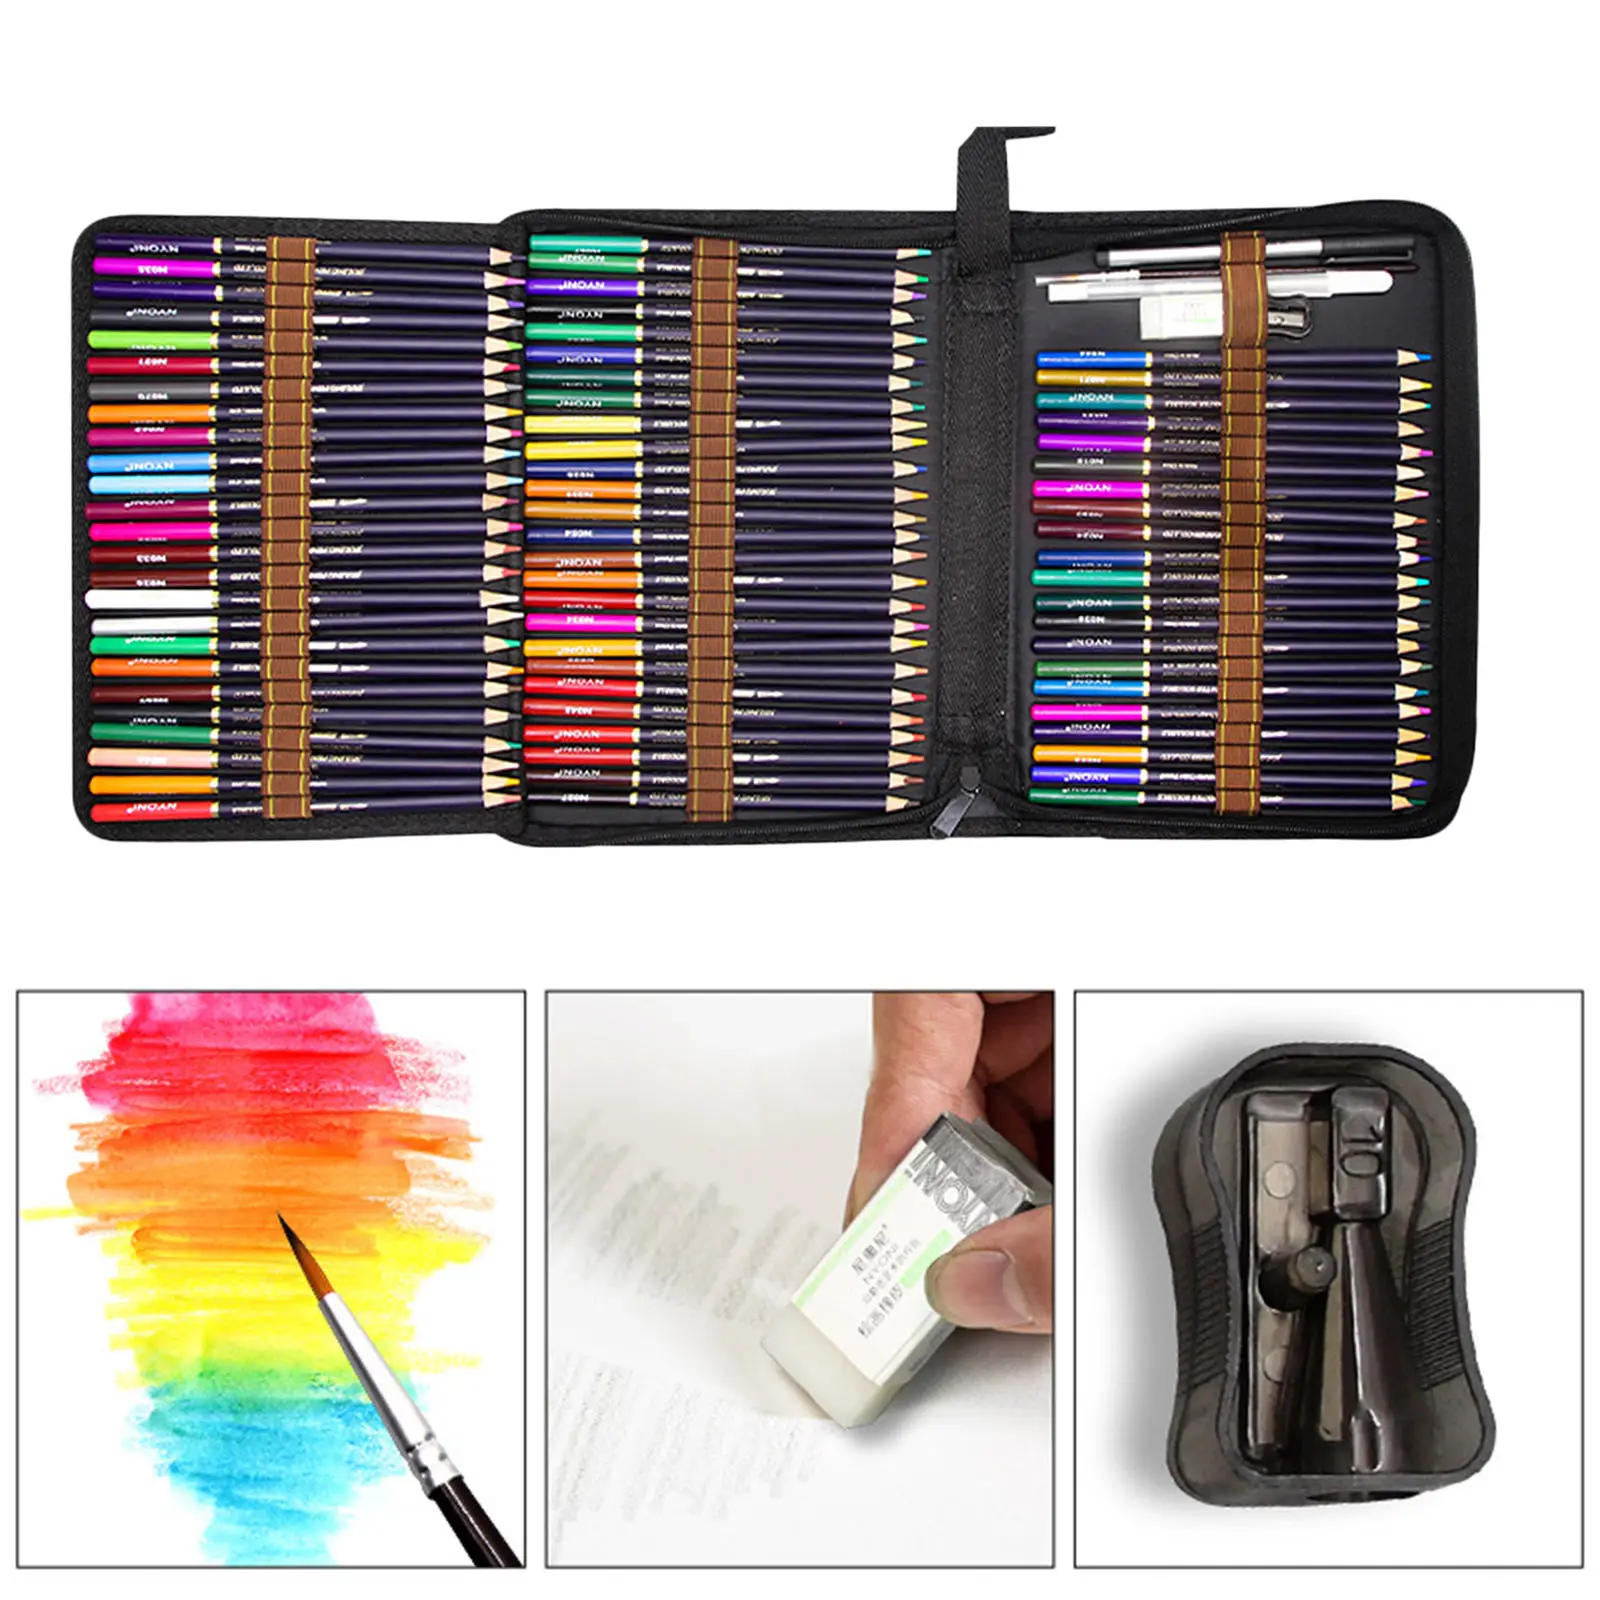 Professional Premium Colored Pencils 72 PCS Assorted Colors Set High Quality Artist Painting Drawing for Adults Kids